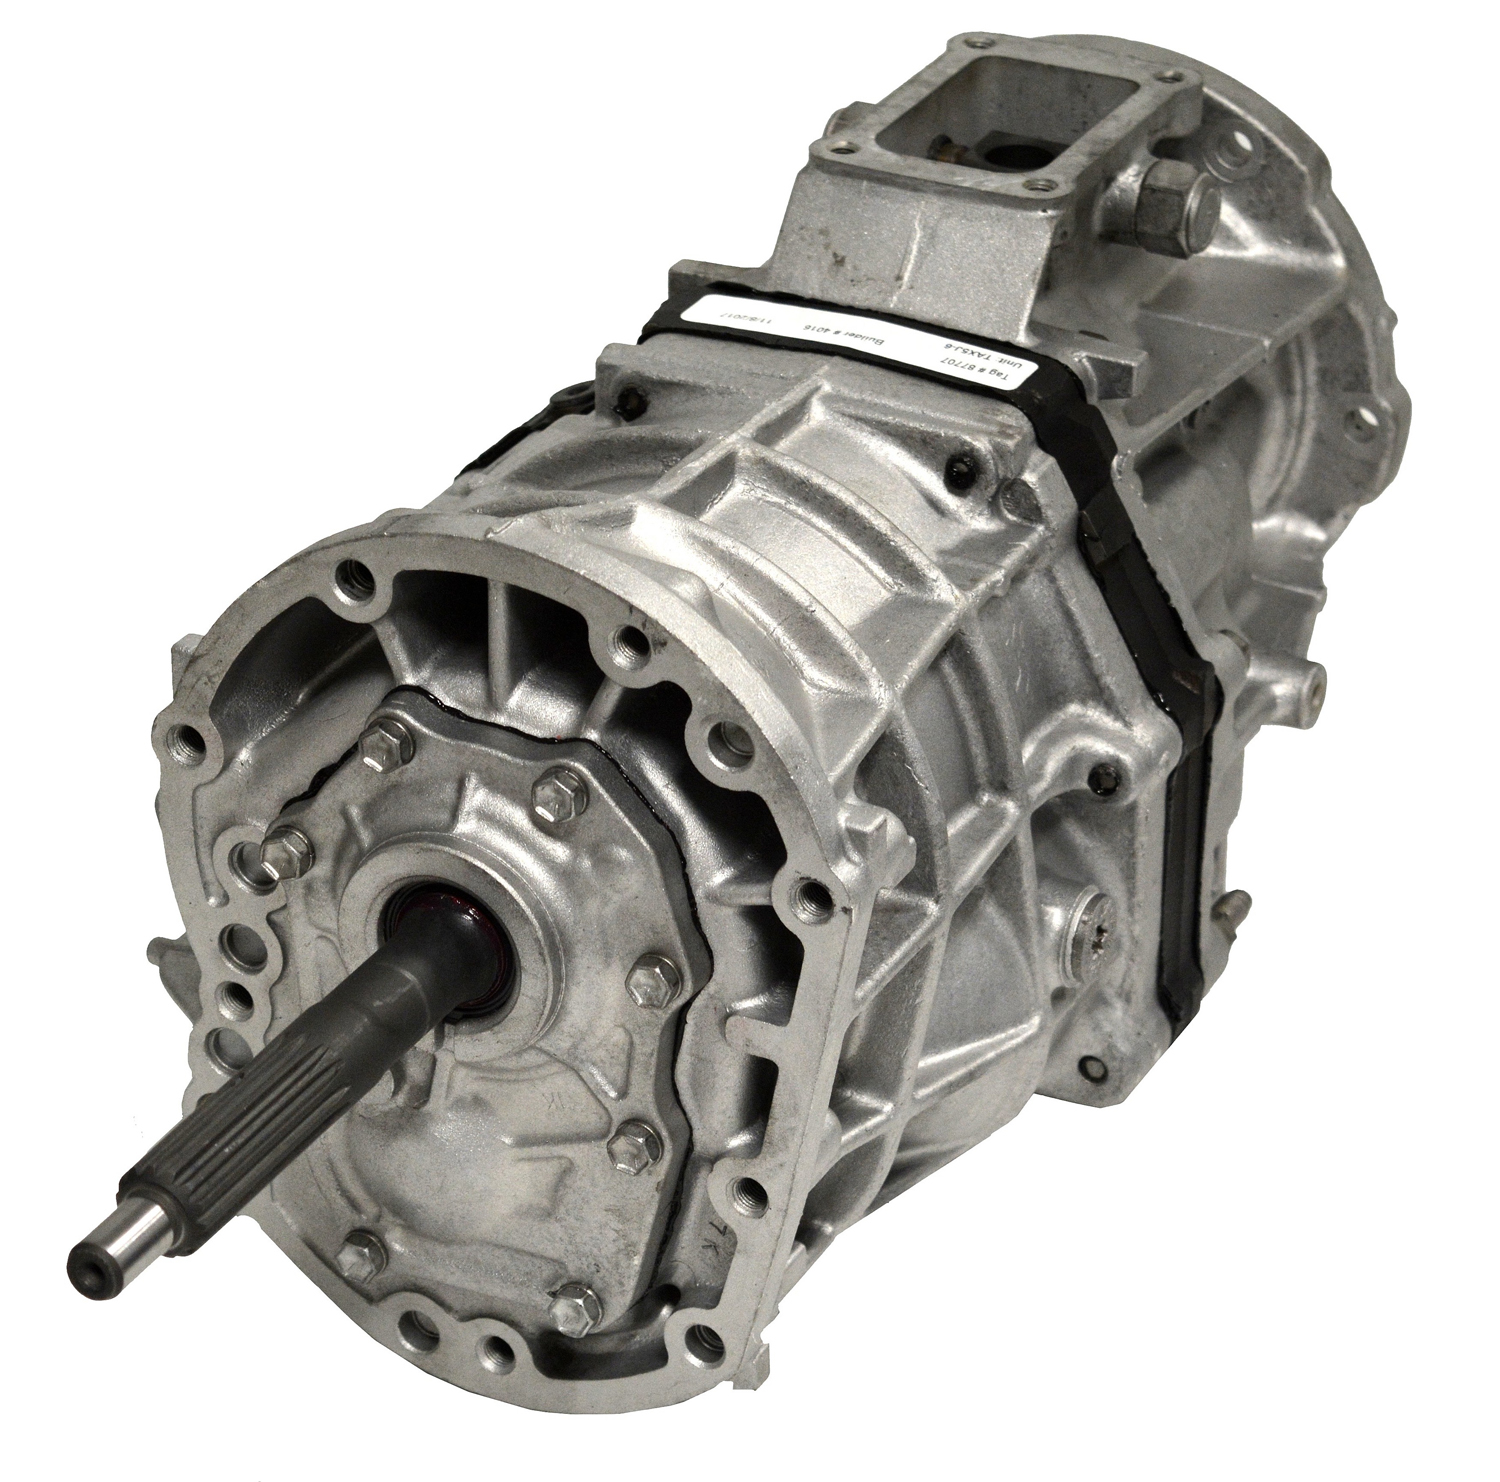 AX5 Manual Transmission for Jeep 97-02 Wrangler, 5 Speed